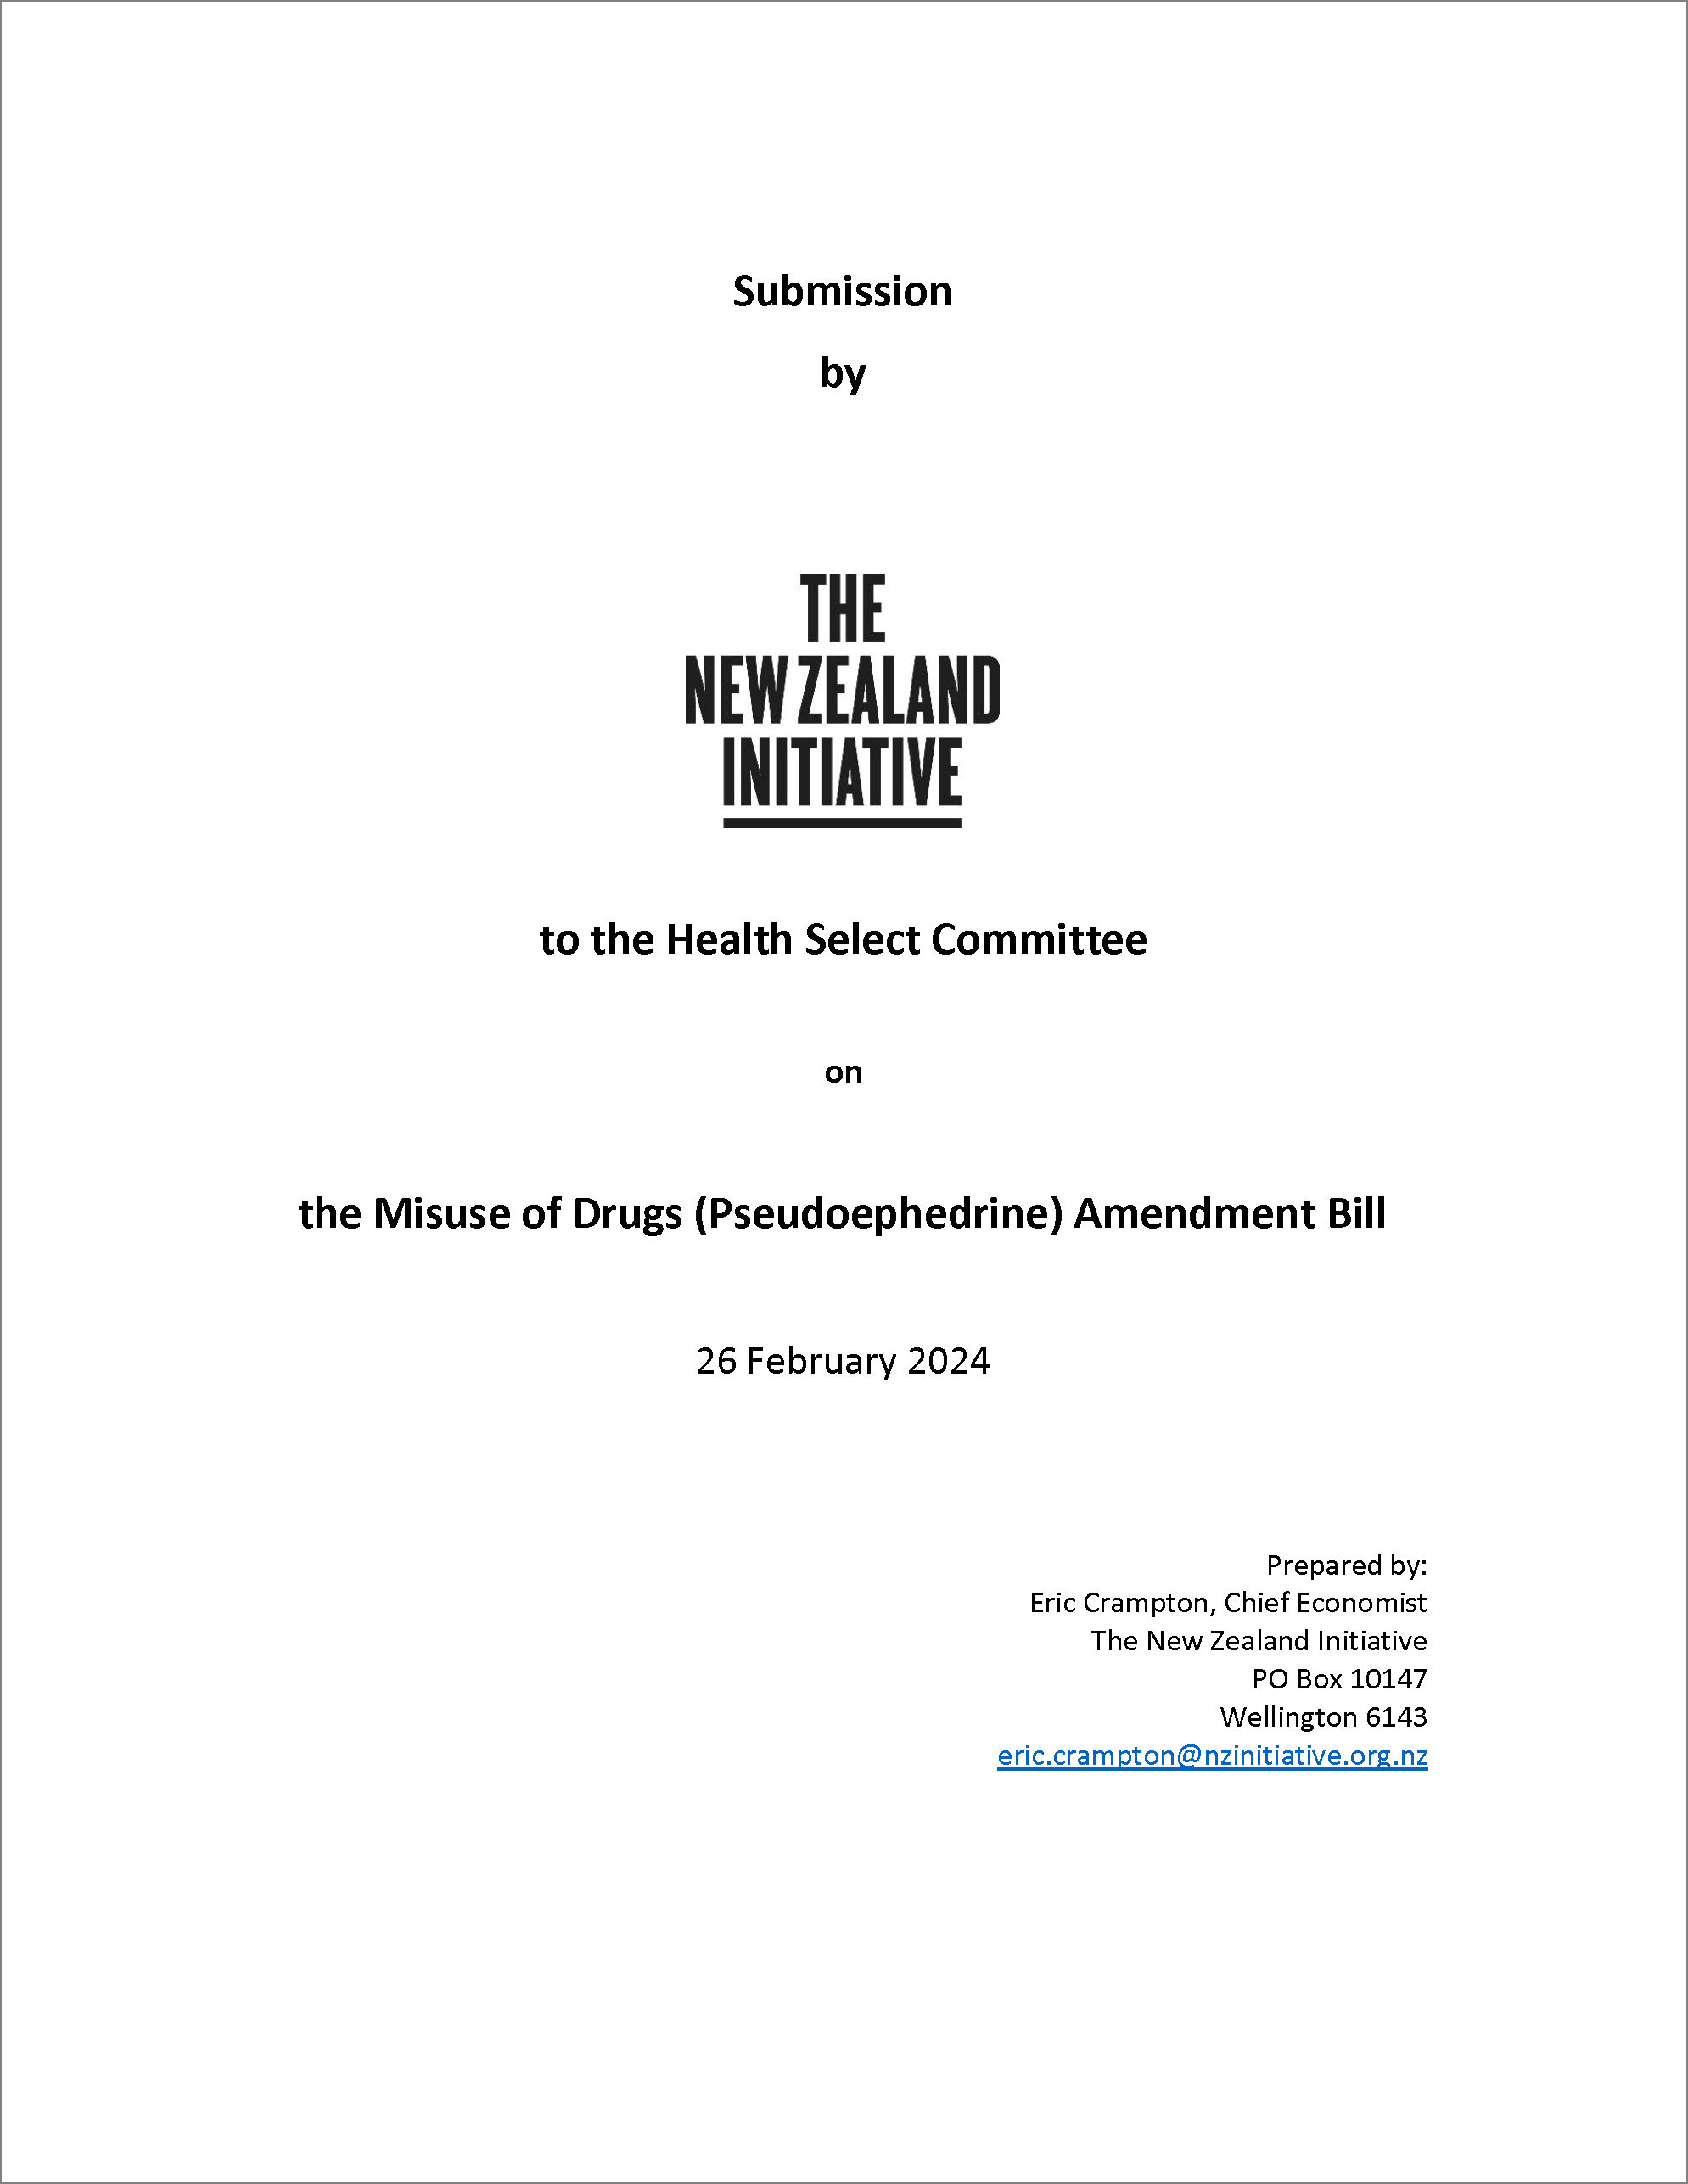 Misuse of Drugs Pseudoephedrine Amendment Bill with outline